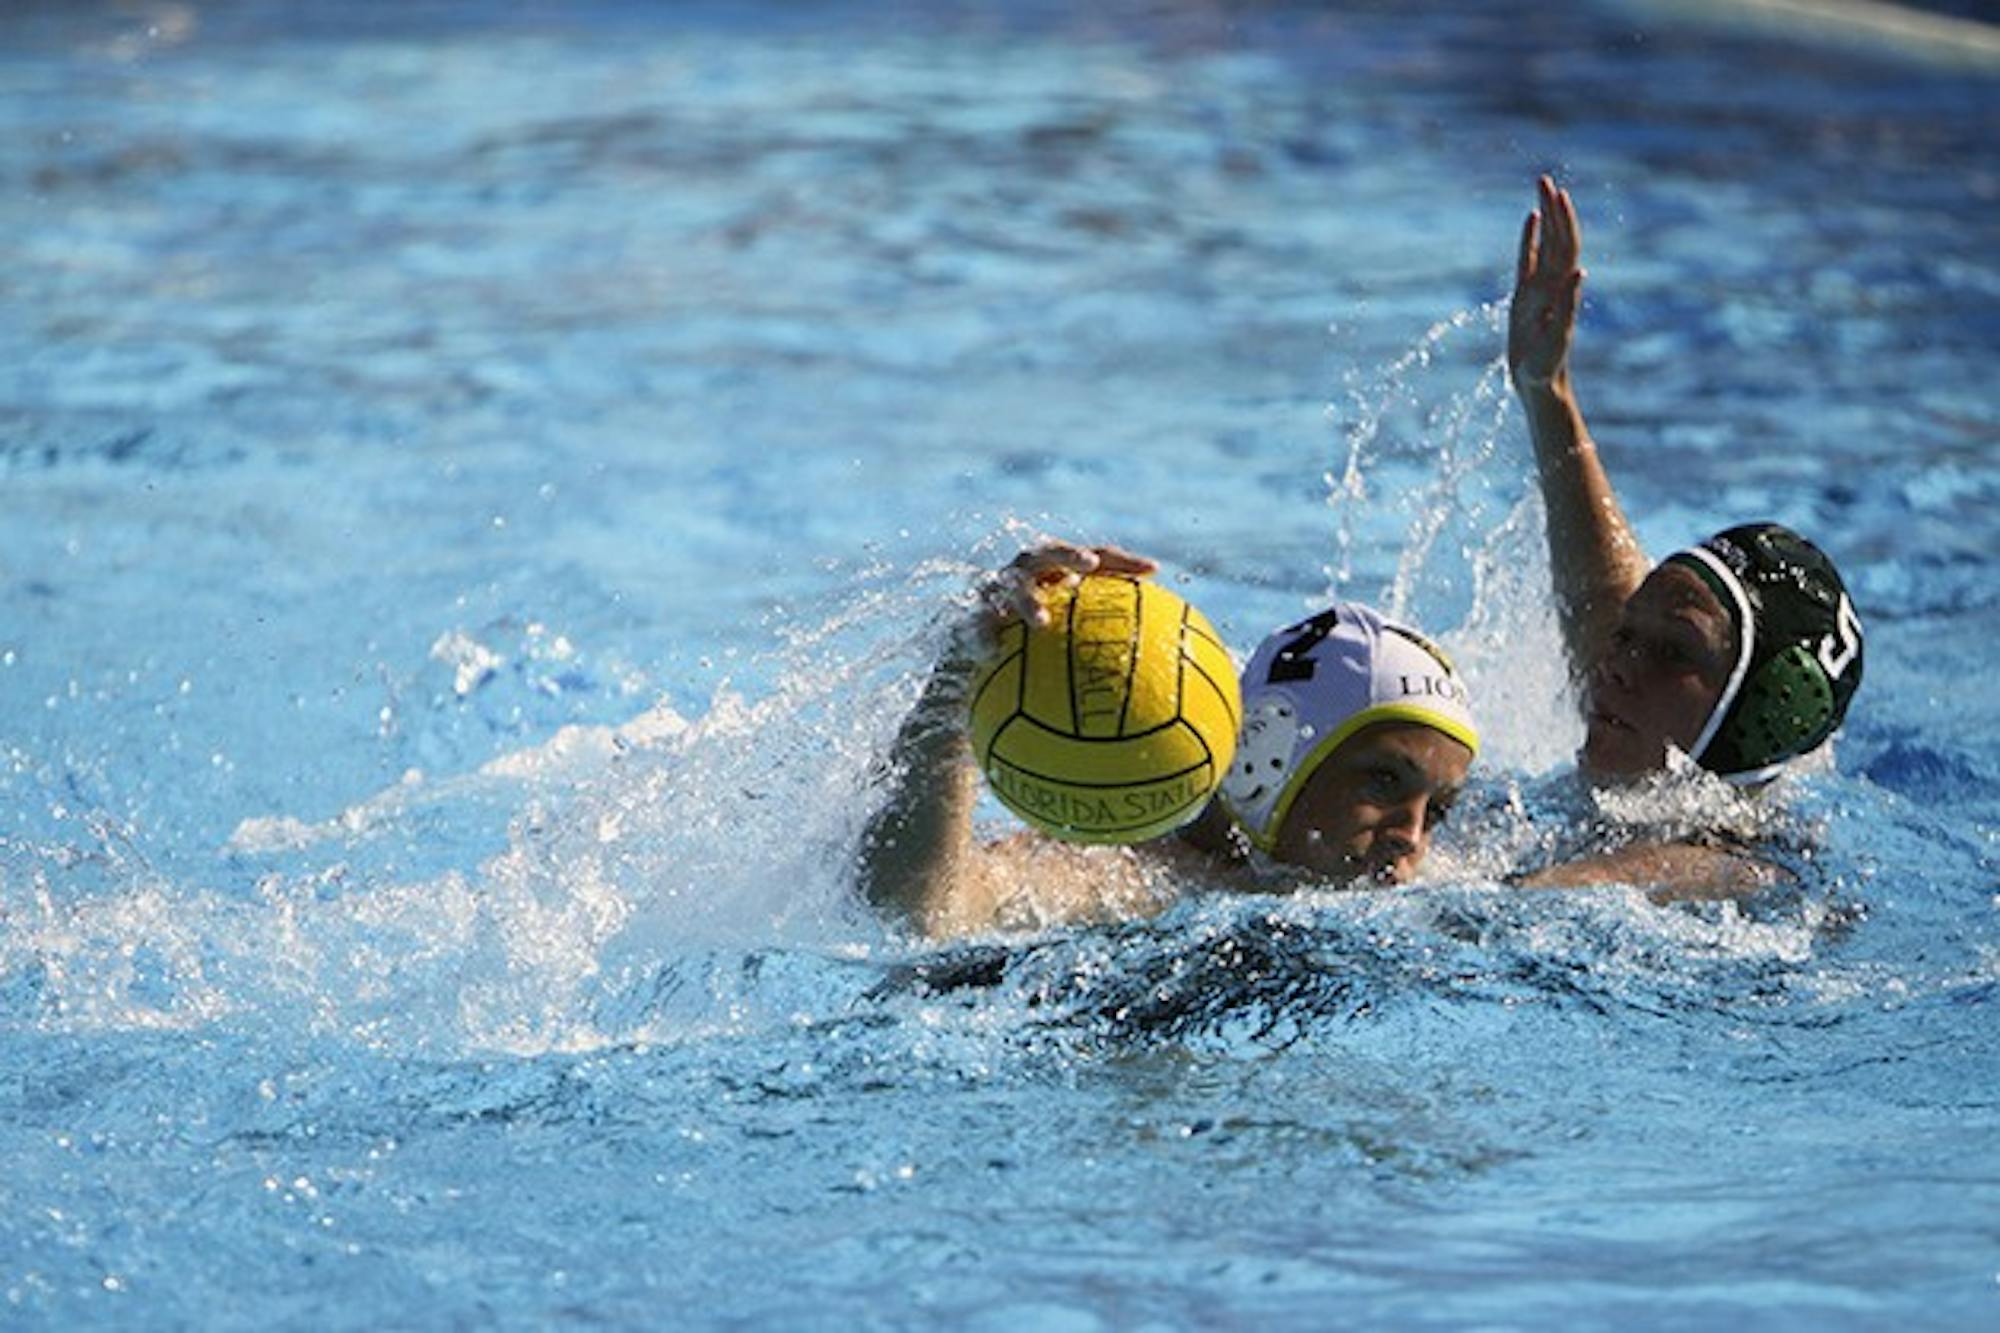 Lisa Rennels '14 defends Lindenwood University's Meghann Kopecky in the women's club water polo's game on Sunday.